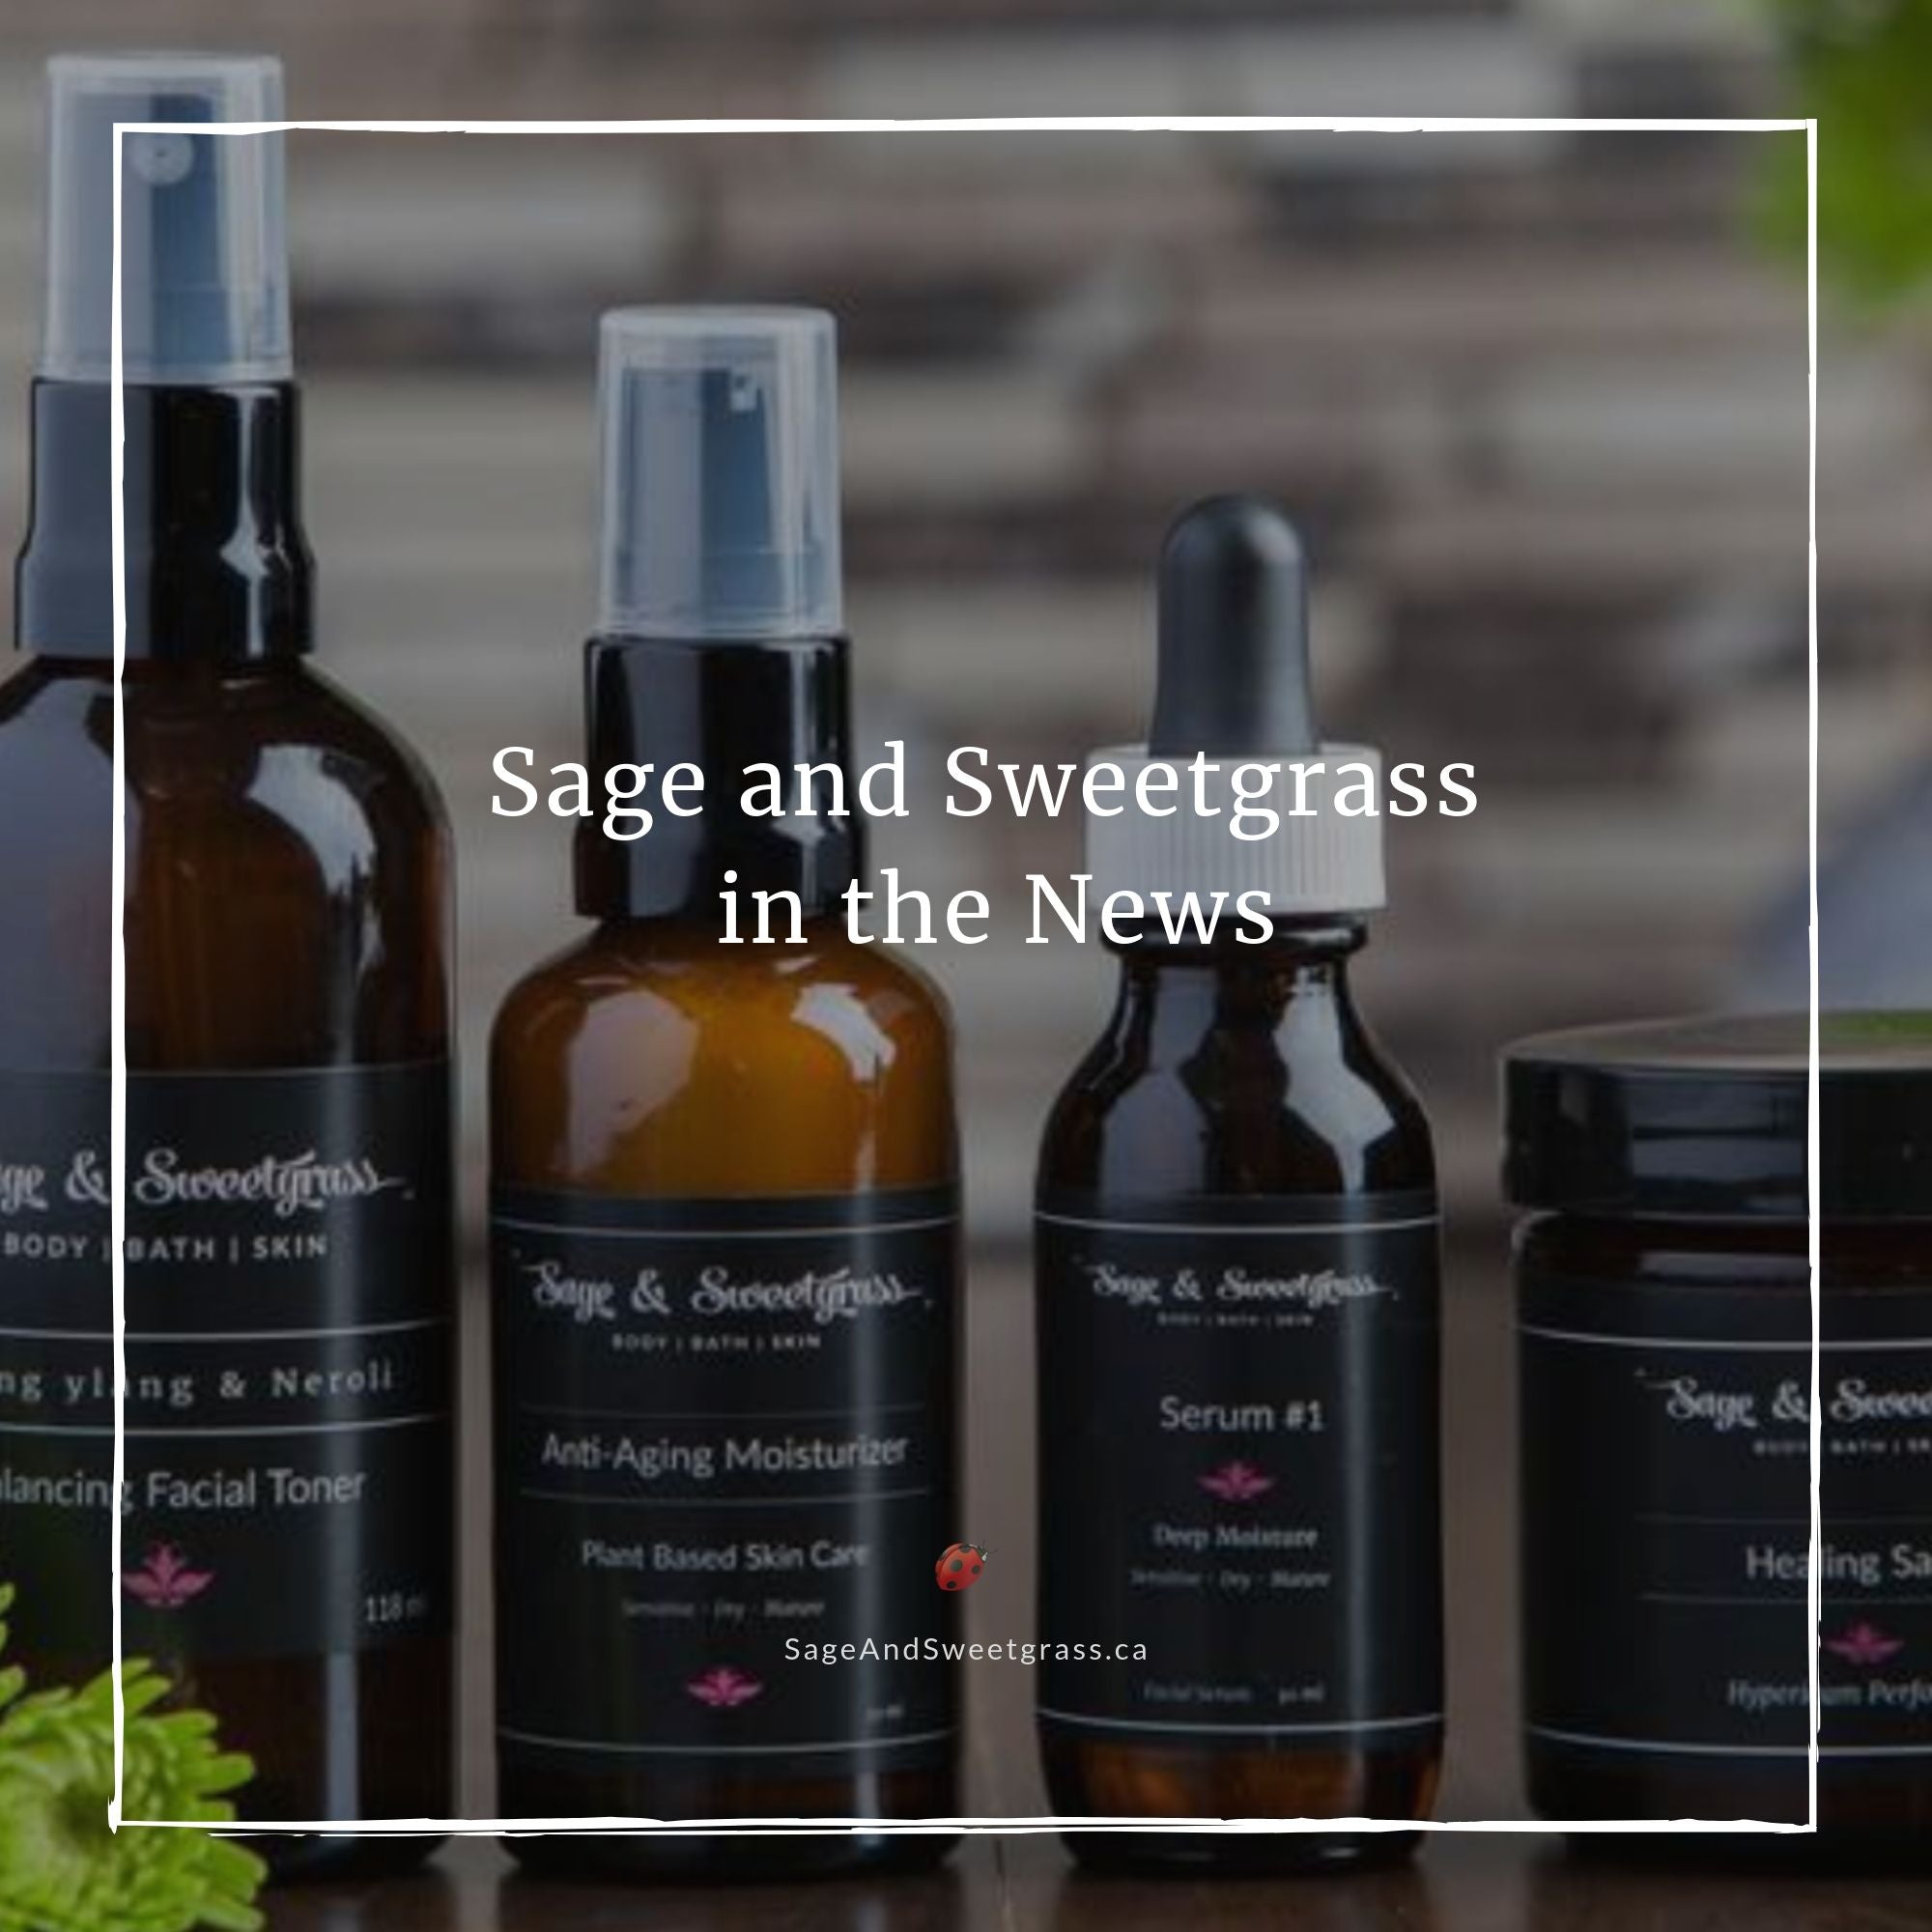 Sage and Sweetgrass in the News